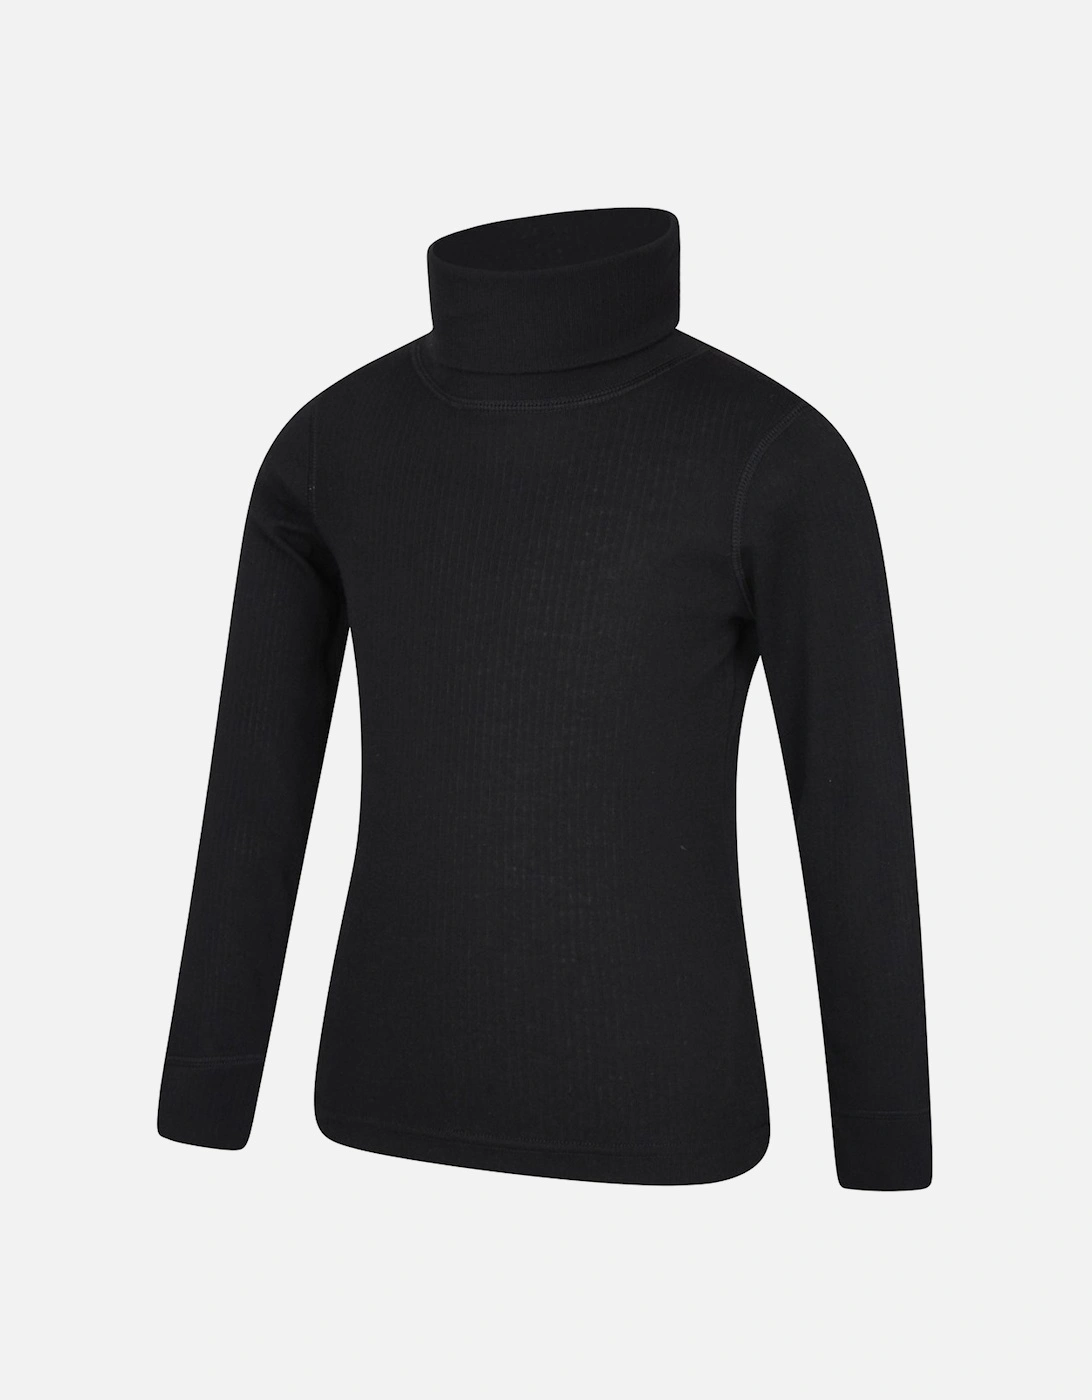 Childrens/Kids Talus Roll Neck Long-Sleeved Top